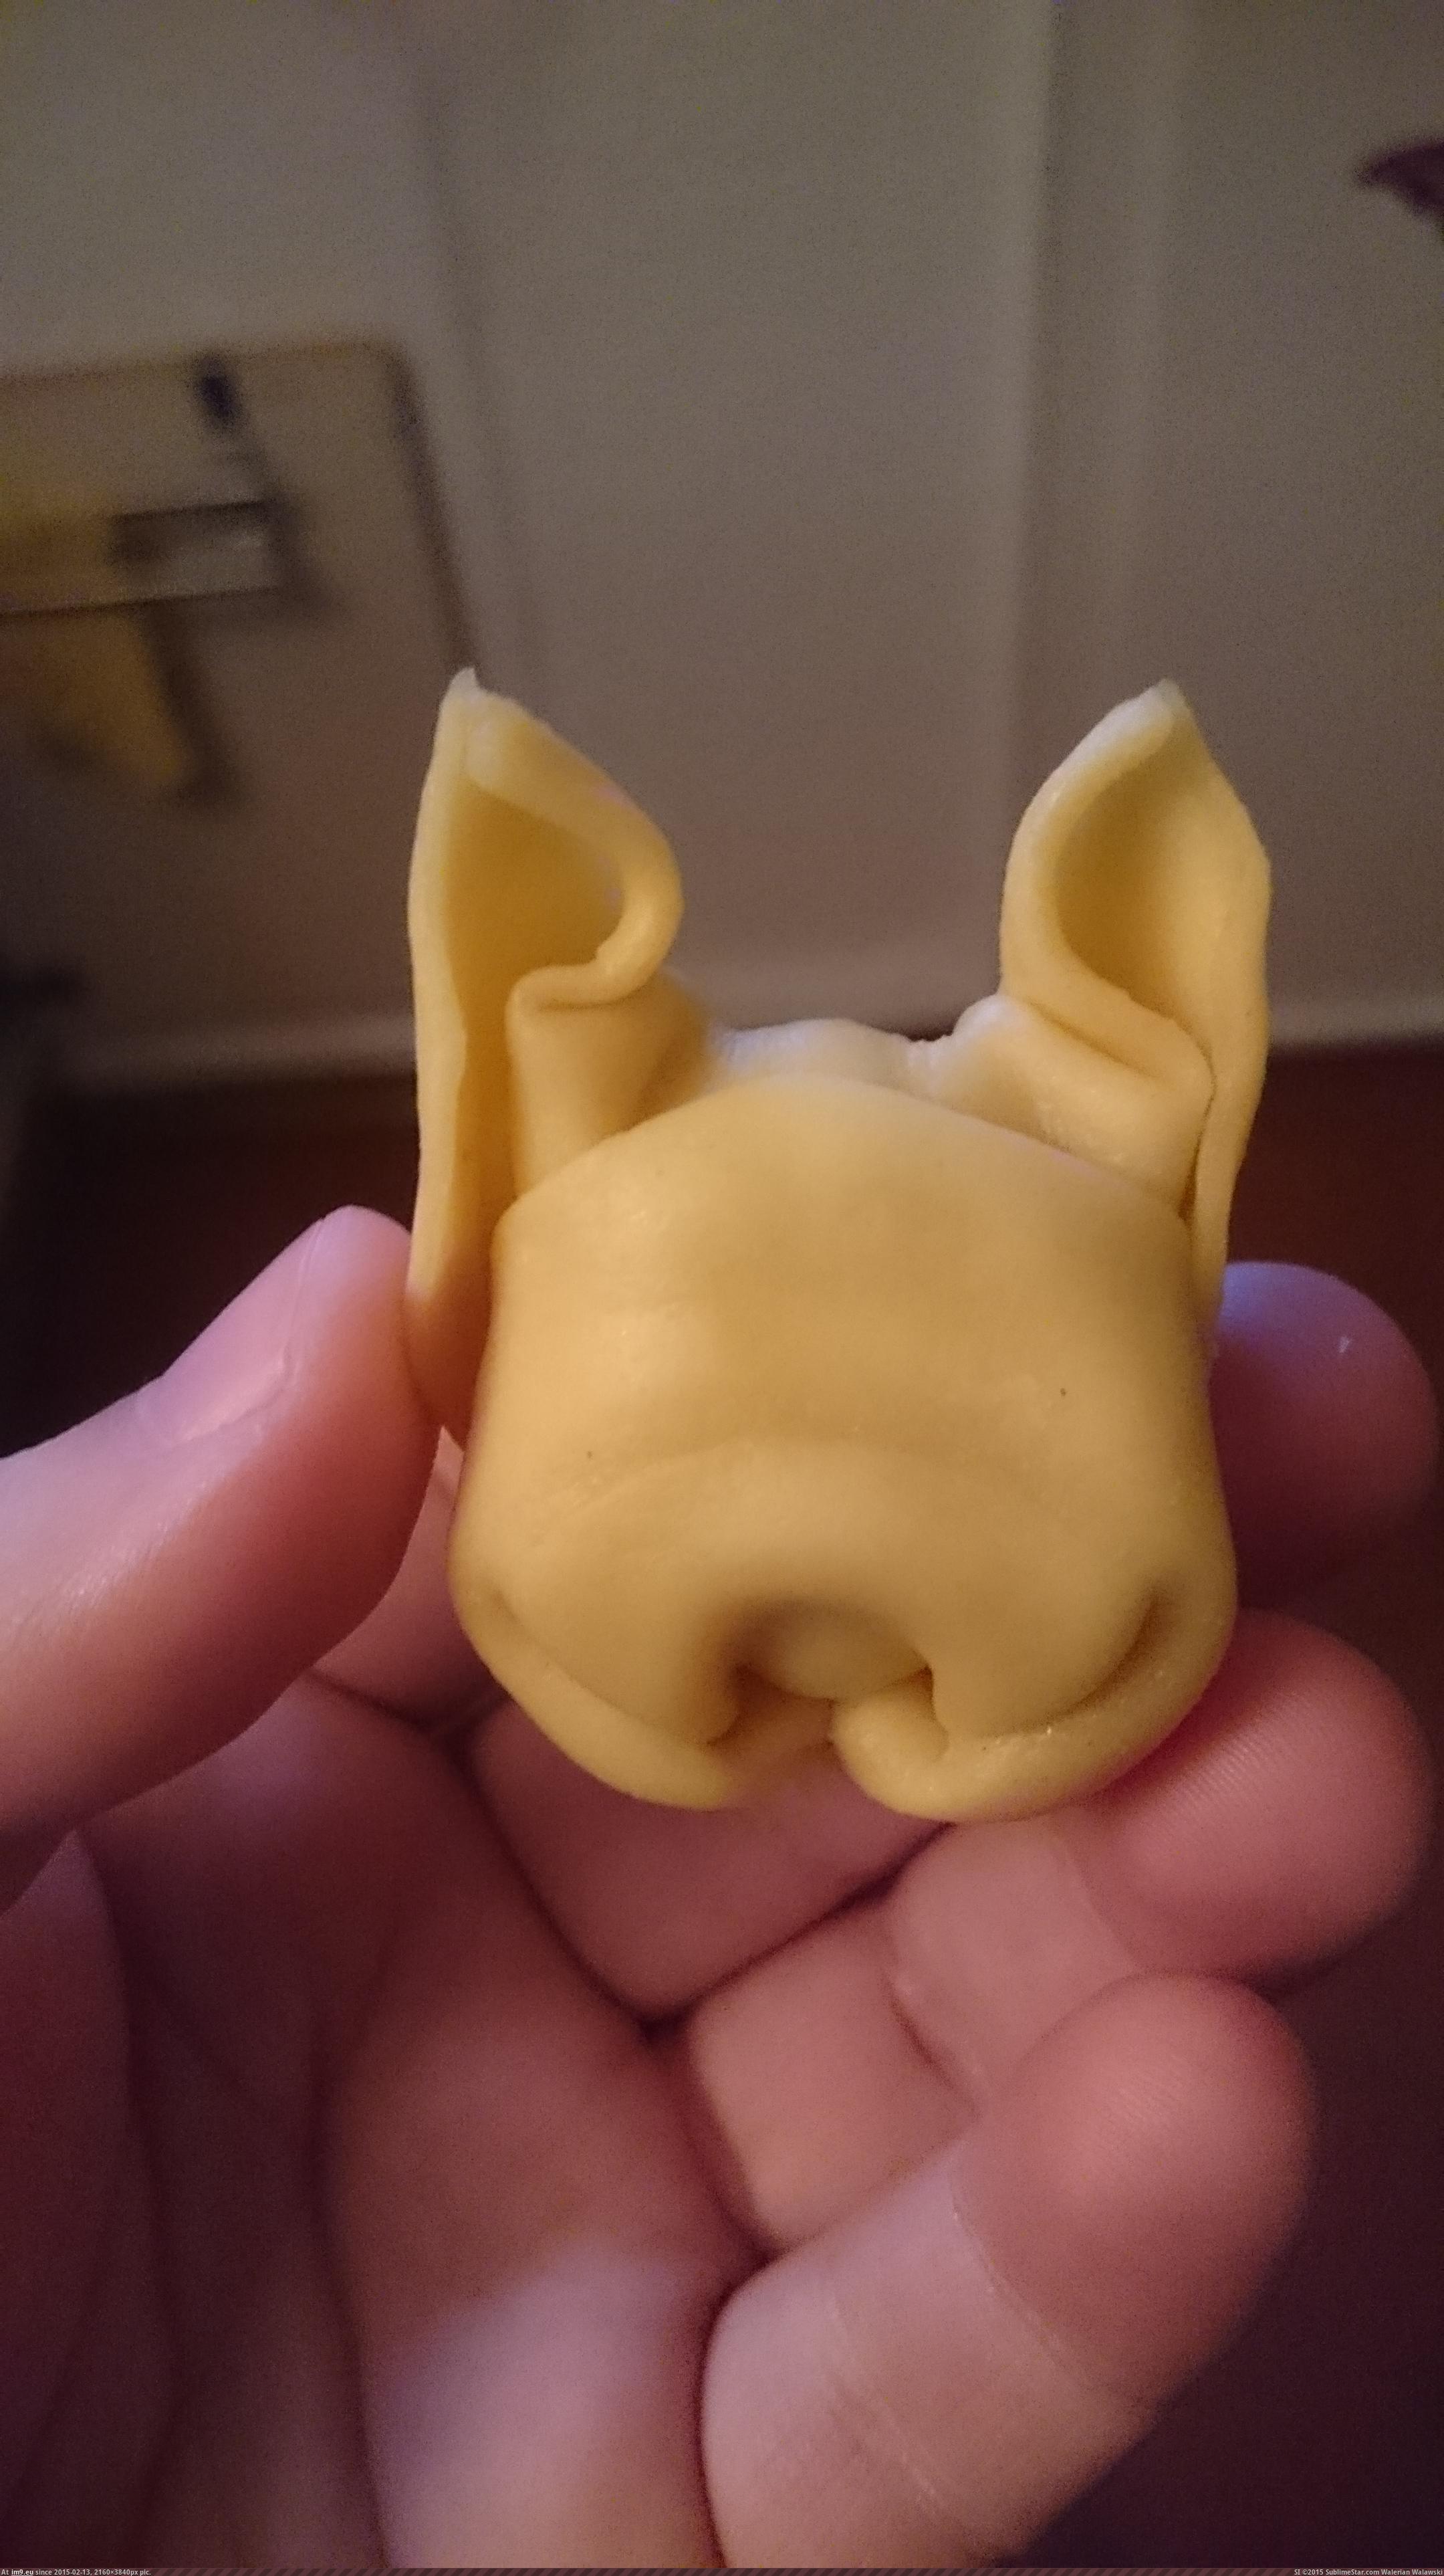 [Mildlyinteresting] These two pieces of pasta looked like the head of a french bulldog. (in My r/MILDLYINTERESTING favs)